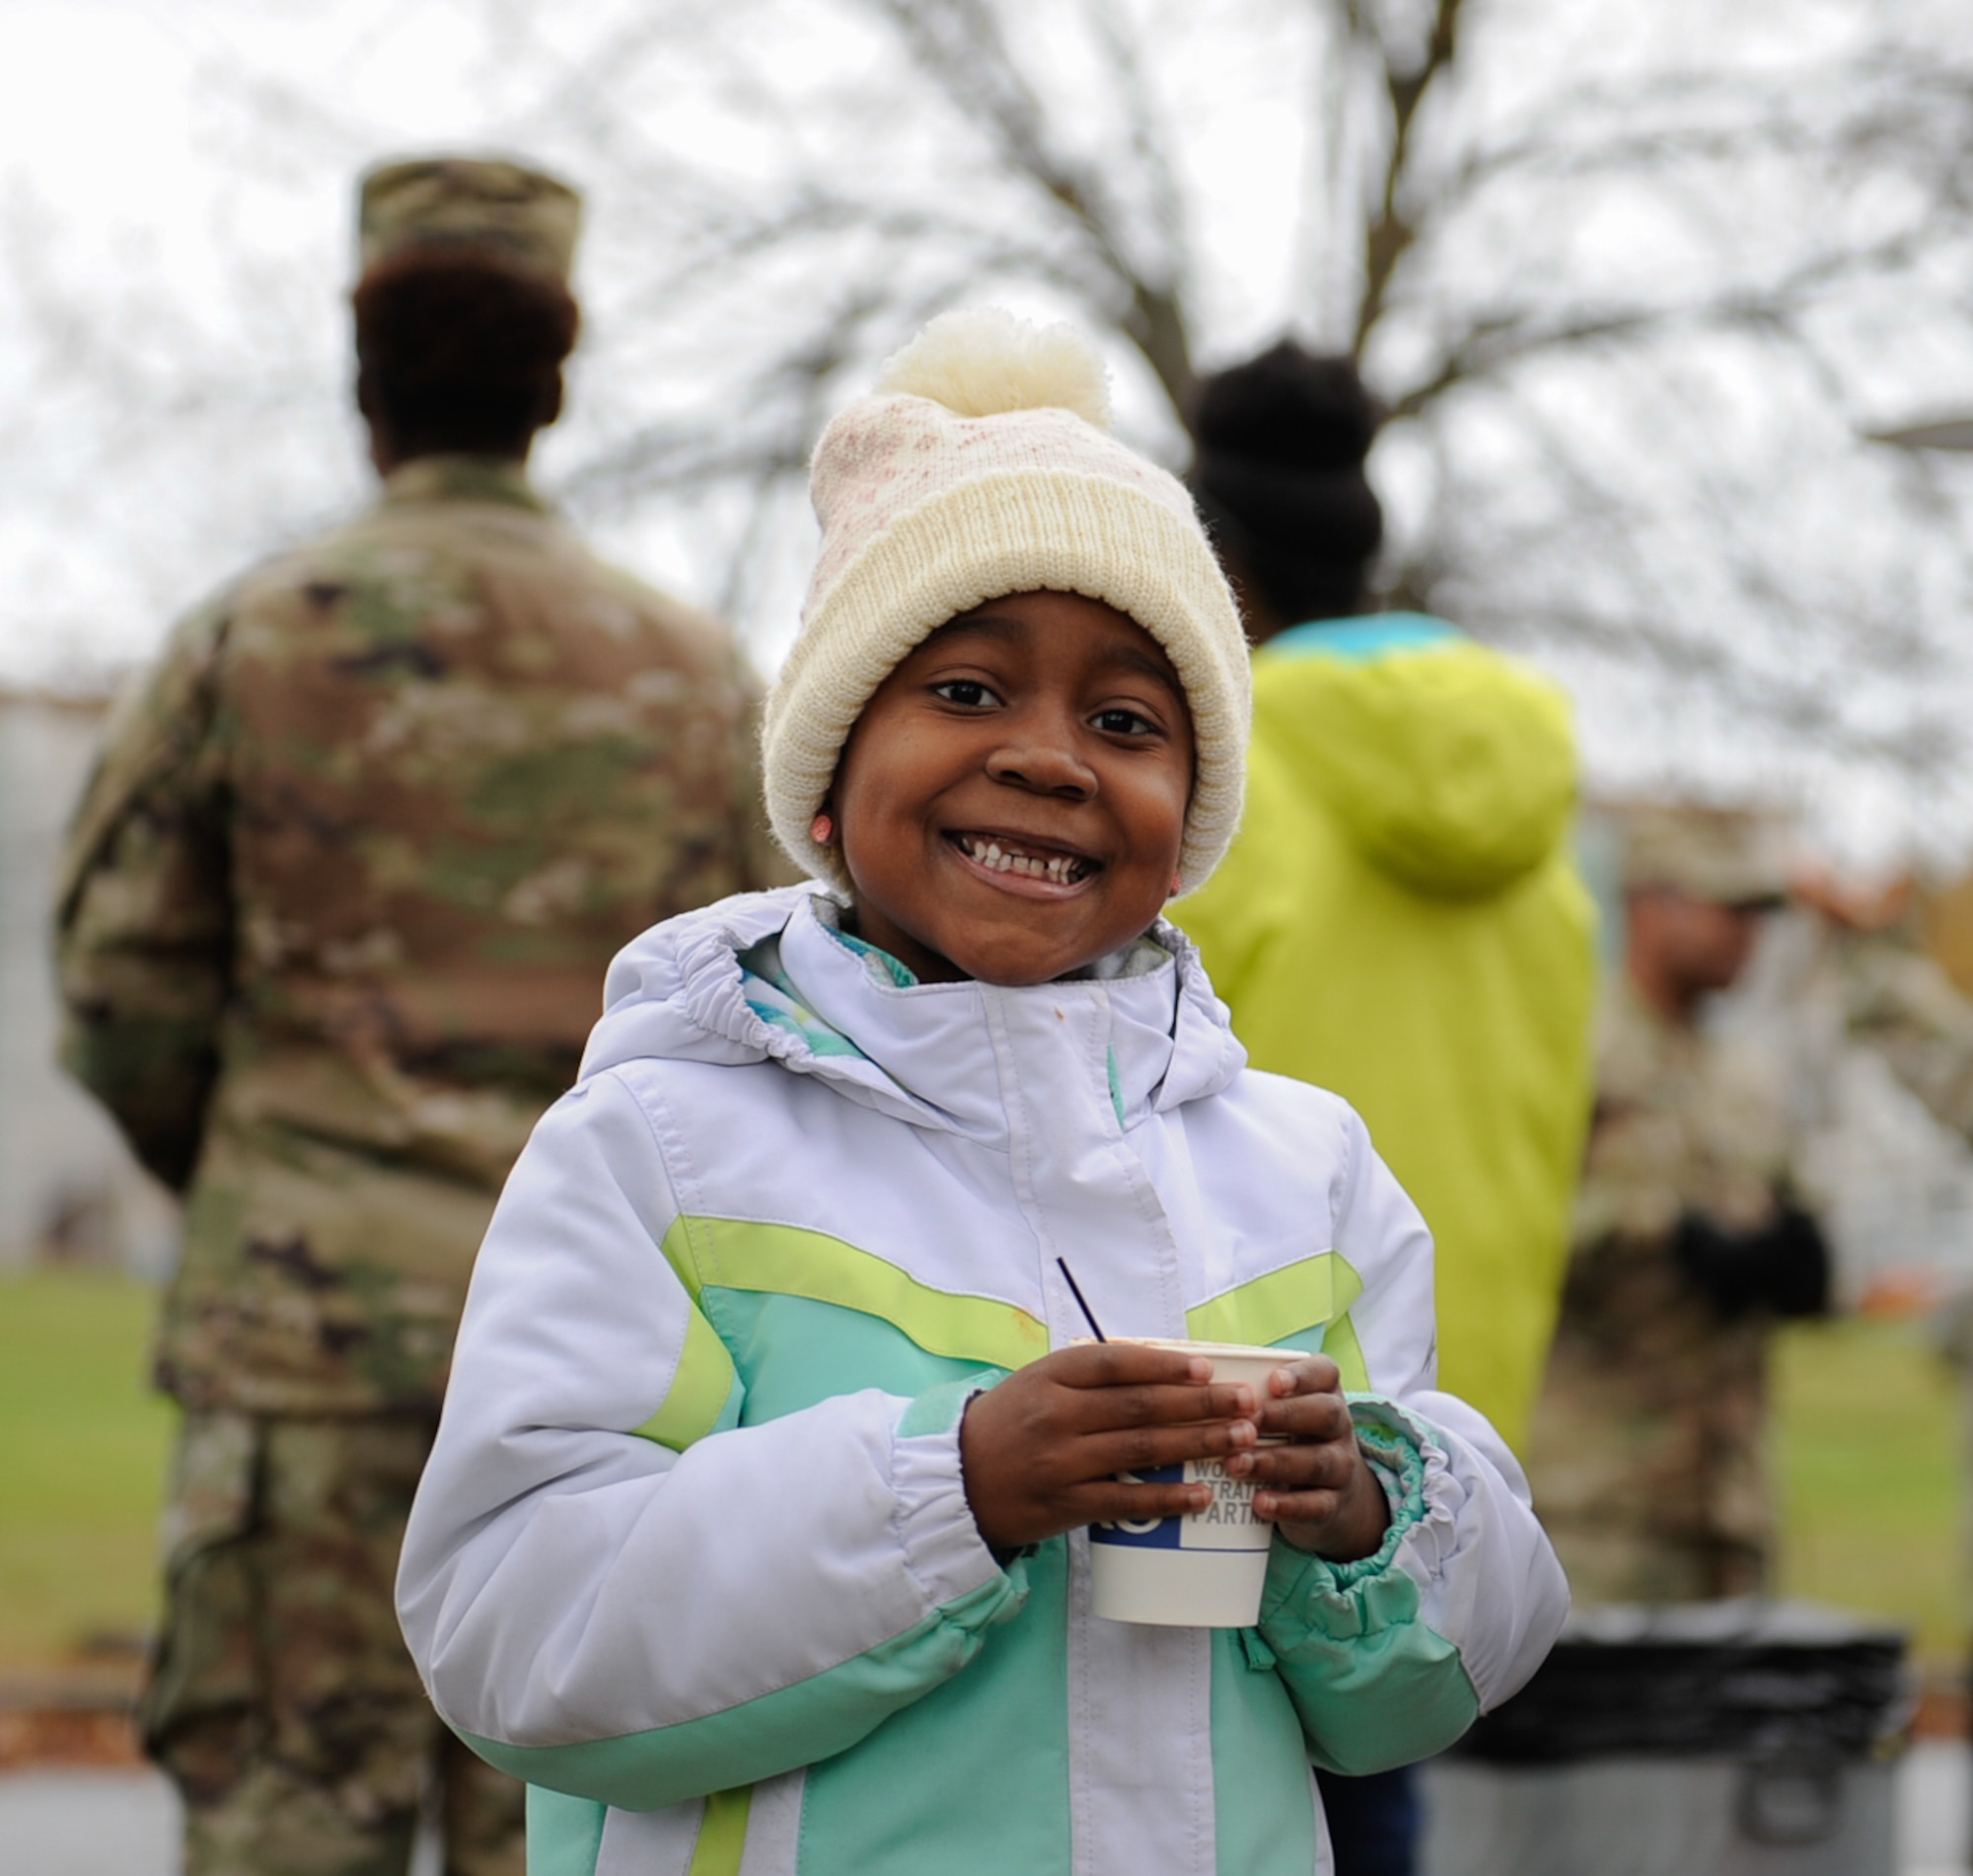 Kimora Richie, daughter of U.S. Army Sergeant Keith Richie, Kleber Kaserne laboratory NCO in charge, warms herself up with hot chocolate at the Thanks for Thanksgiving event at Vogelweh Air Base. Germany, Nov. 19, 2016. More than 660 joint families were supported during this year’s Thanks for Thanksgiving event. (U.S. Air Force photo by Airman 1st Class Savannah L. Waters)

